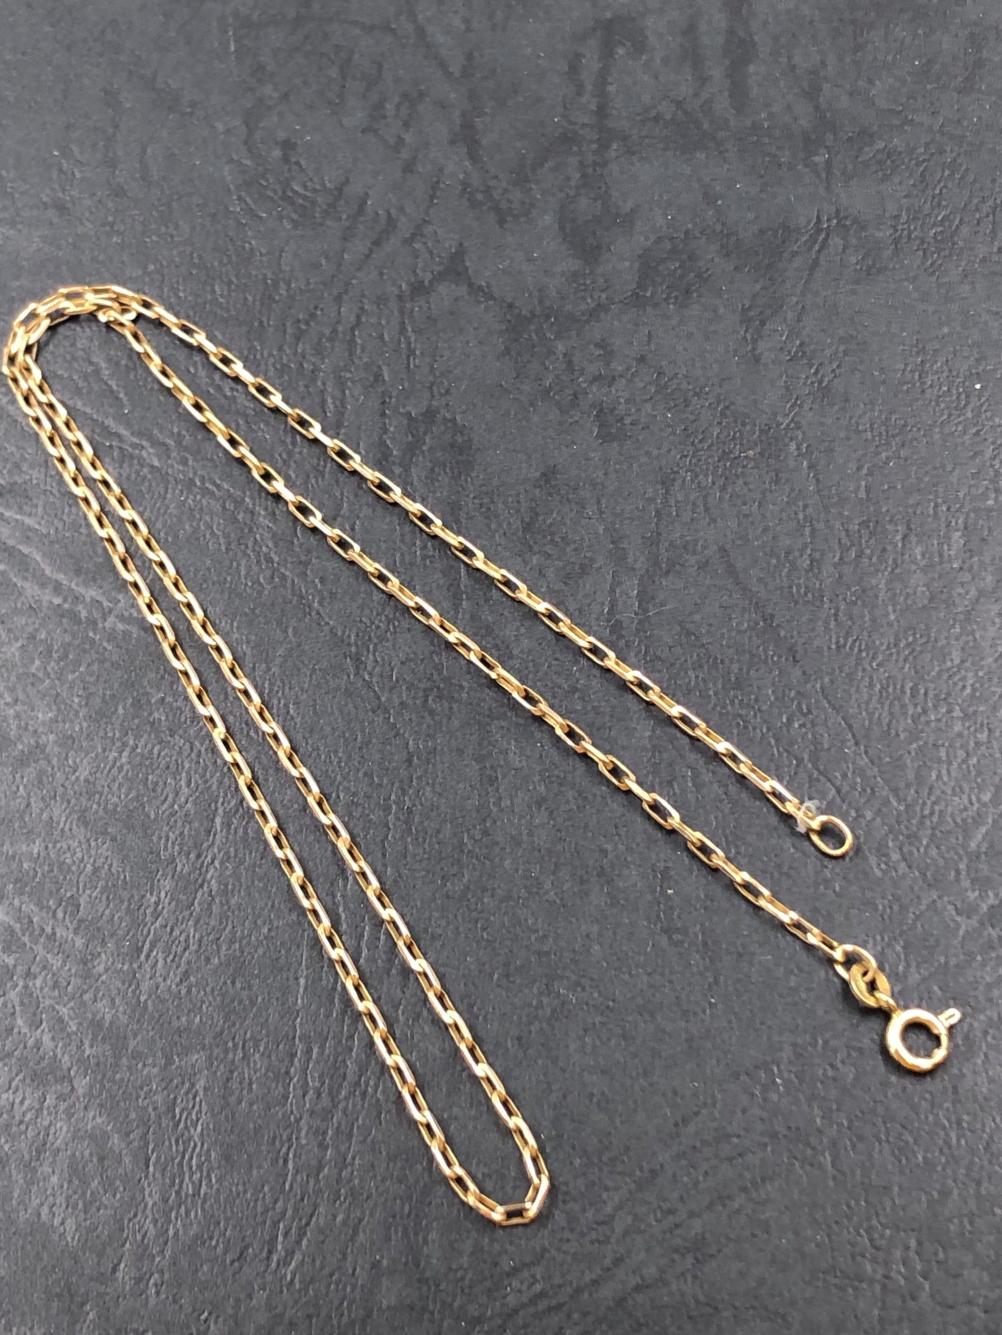 A UNOAERRE ITALIAN 9ct GOLD SQUARE BELCHER CHAIN. LENGTH 47cms. WEIGHT 4.37grms.